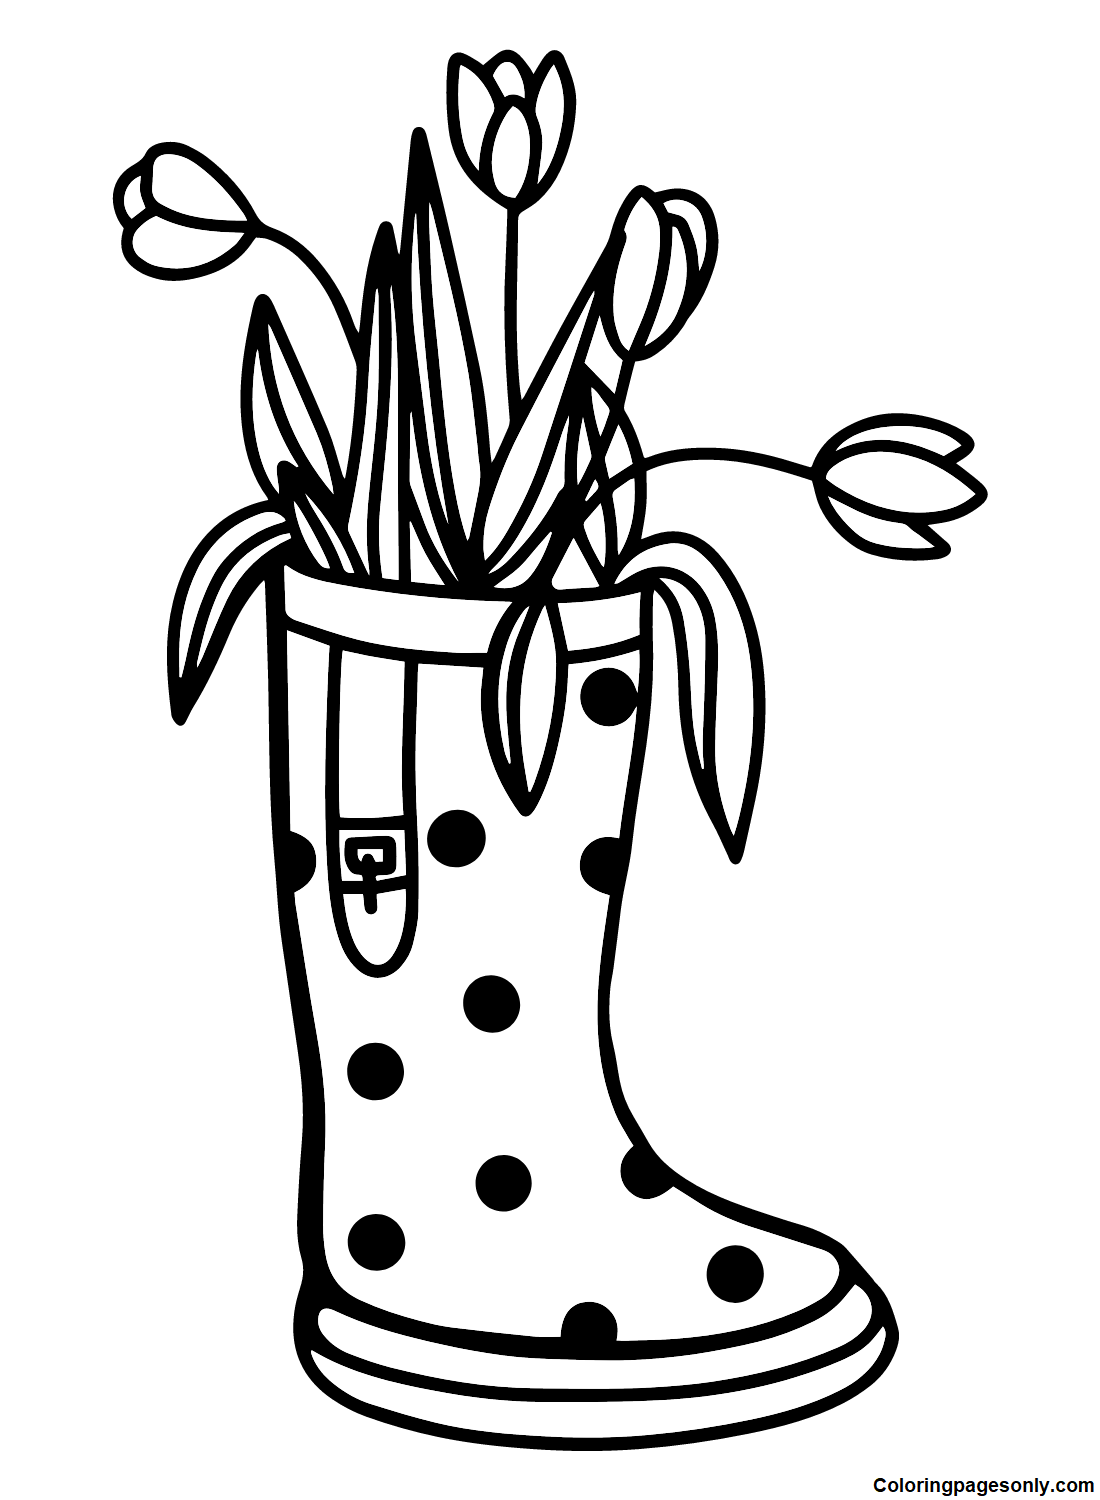 Flowers in Rubber Boots Coloring Page